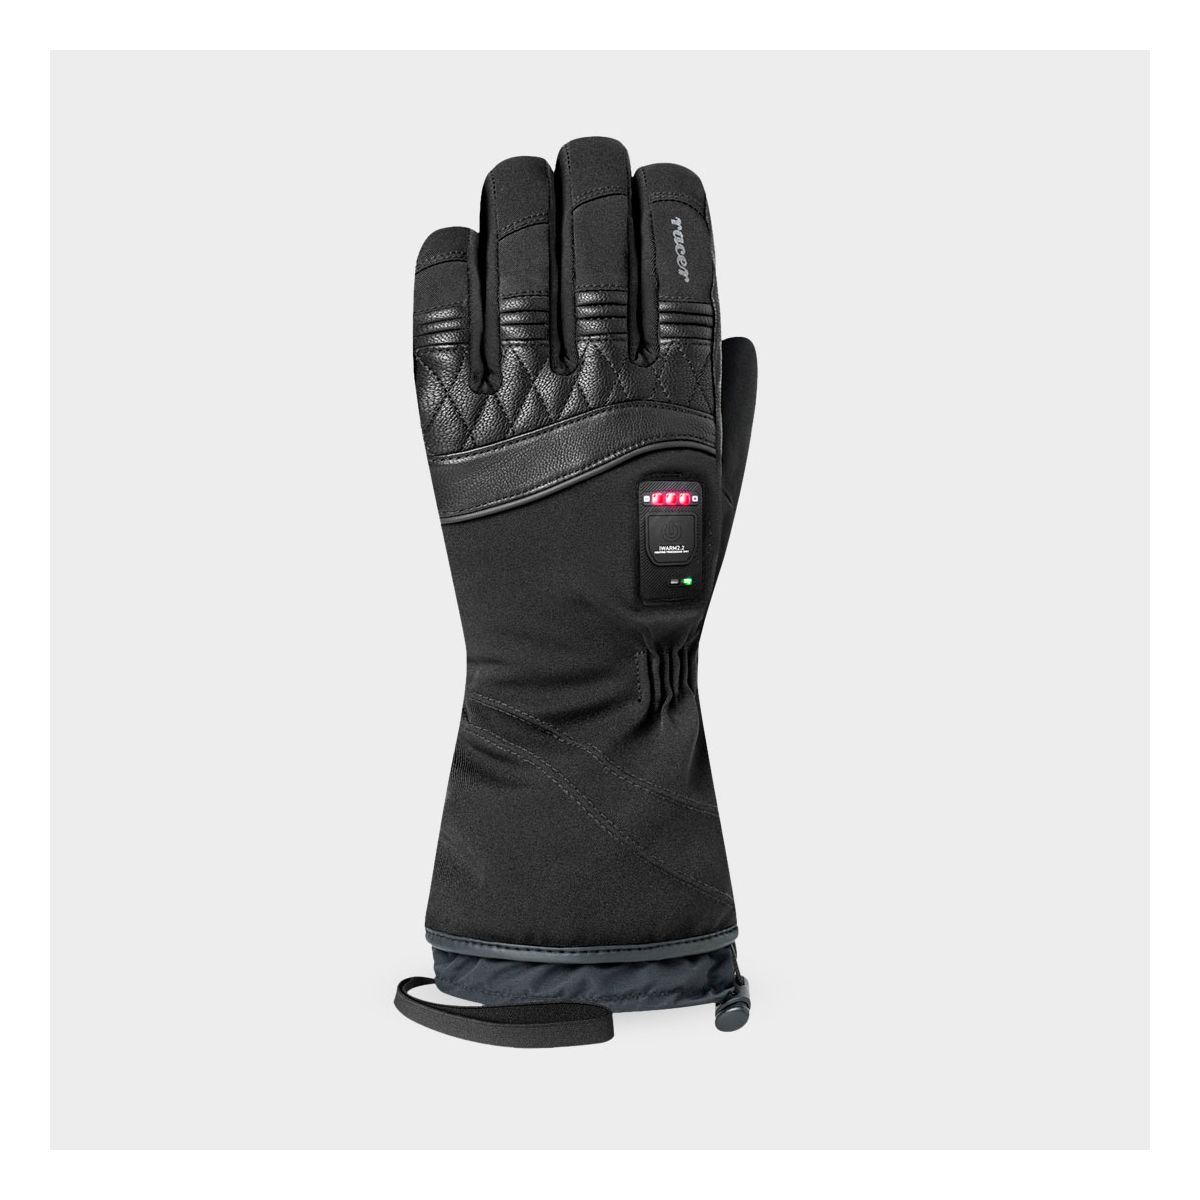 Racer Adults Ski and Sow Gloves - Connectic 4F